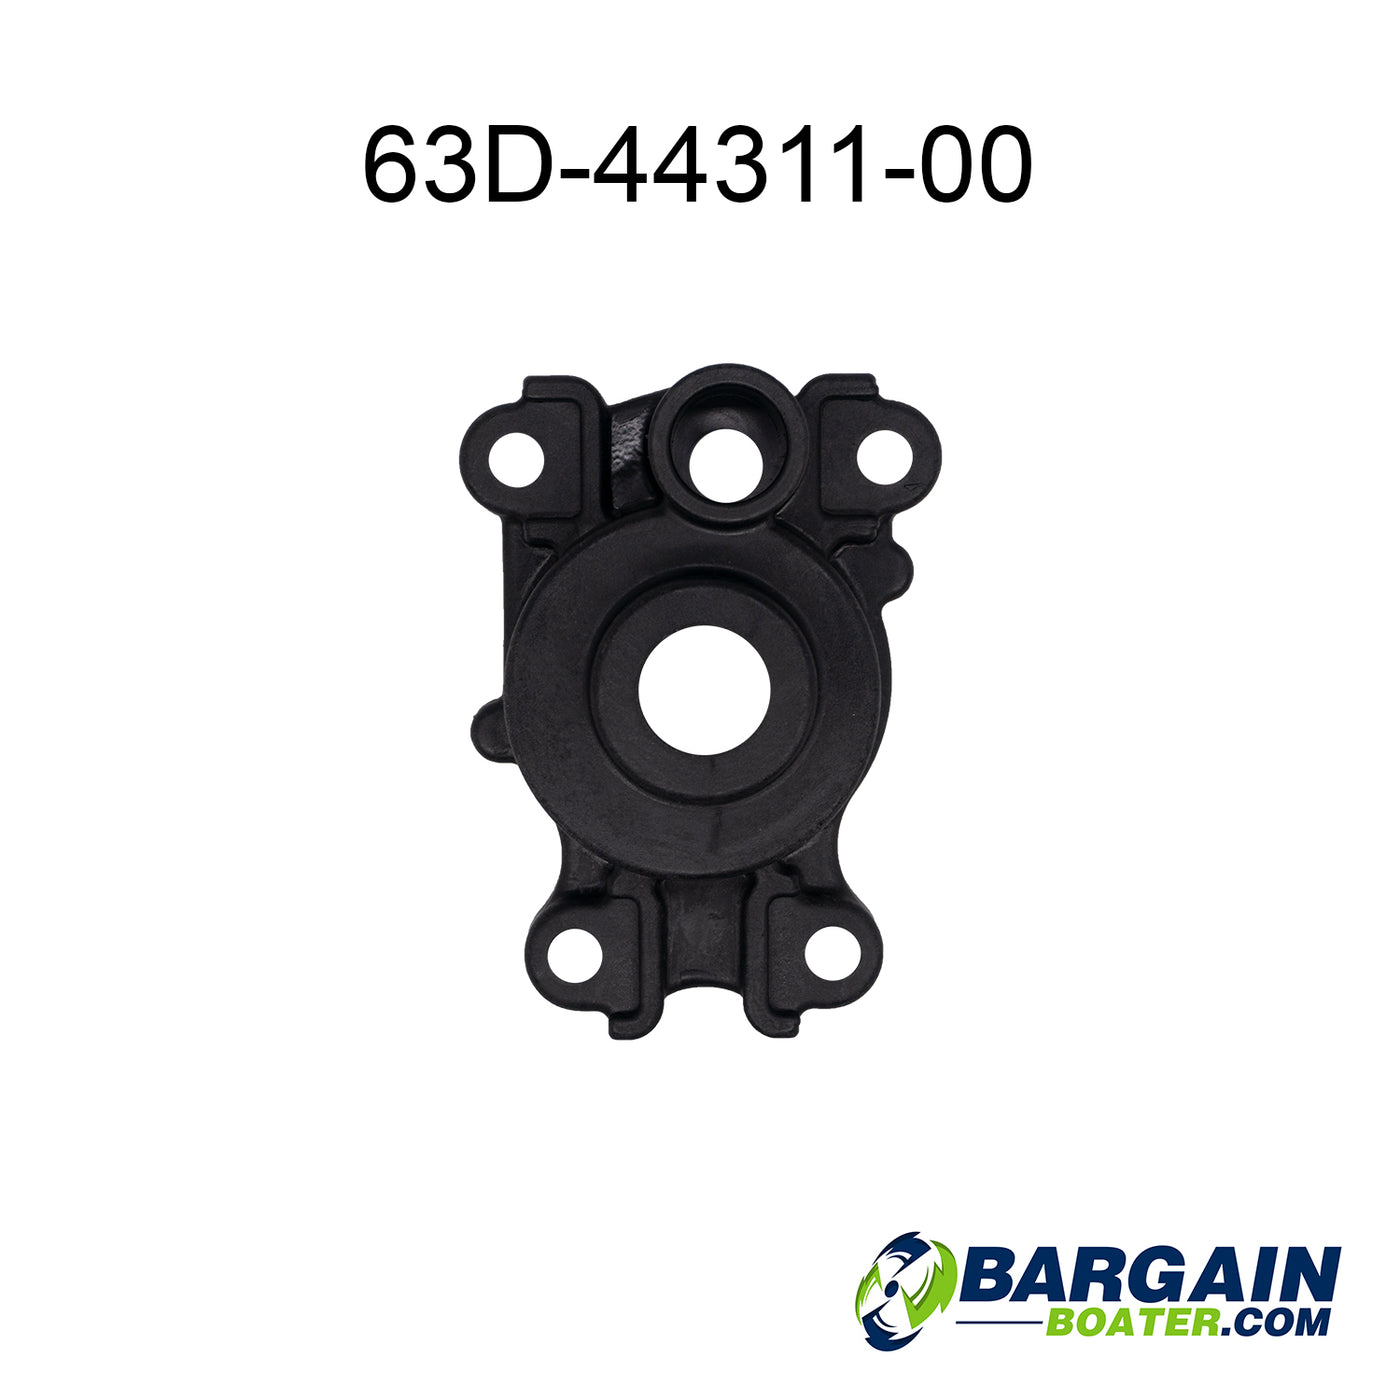 This is a Yamaha Water Pump Housing, part number (63D-44311-00-00).